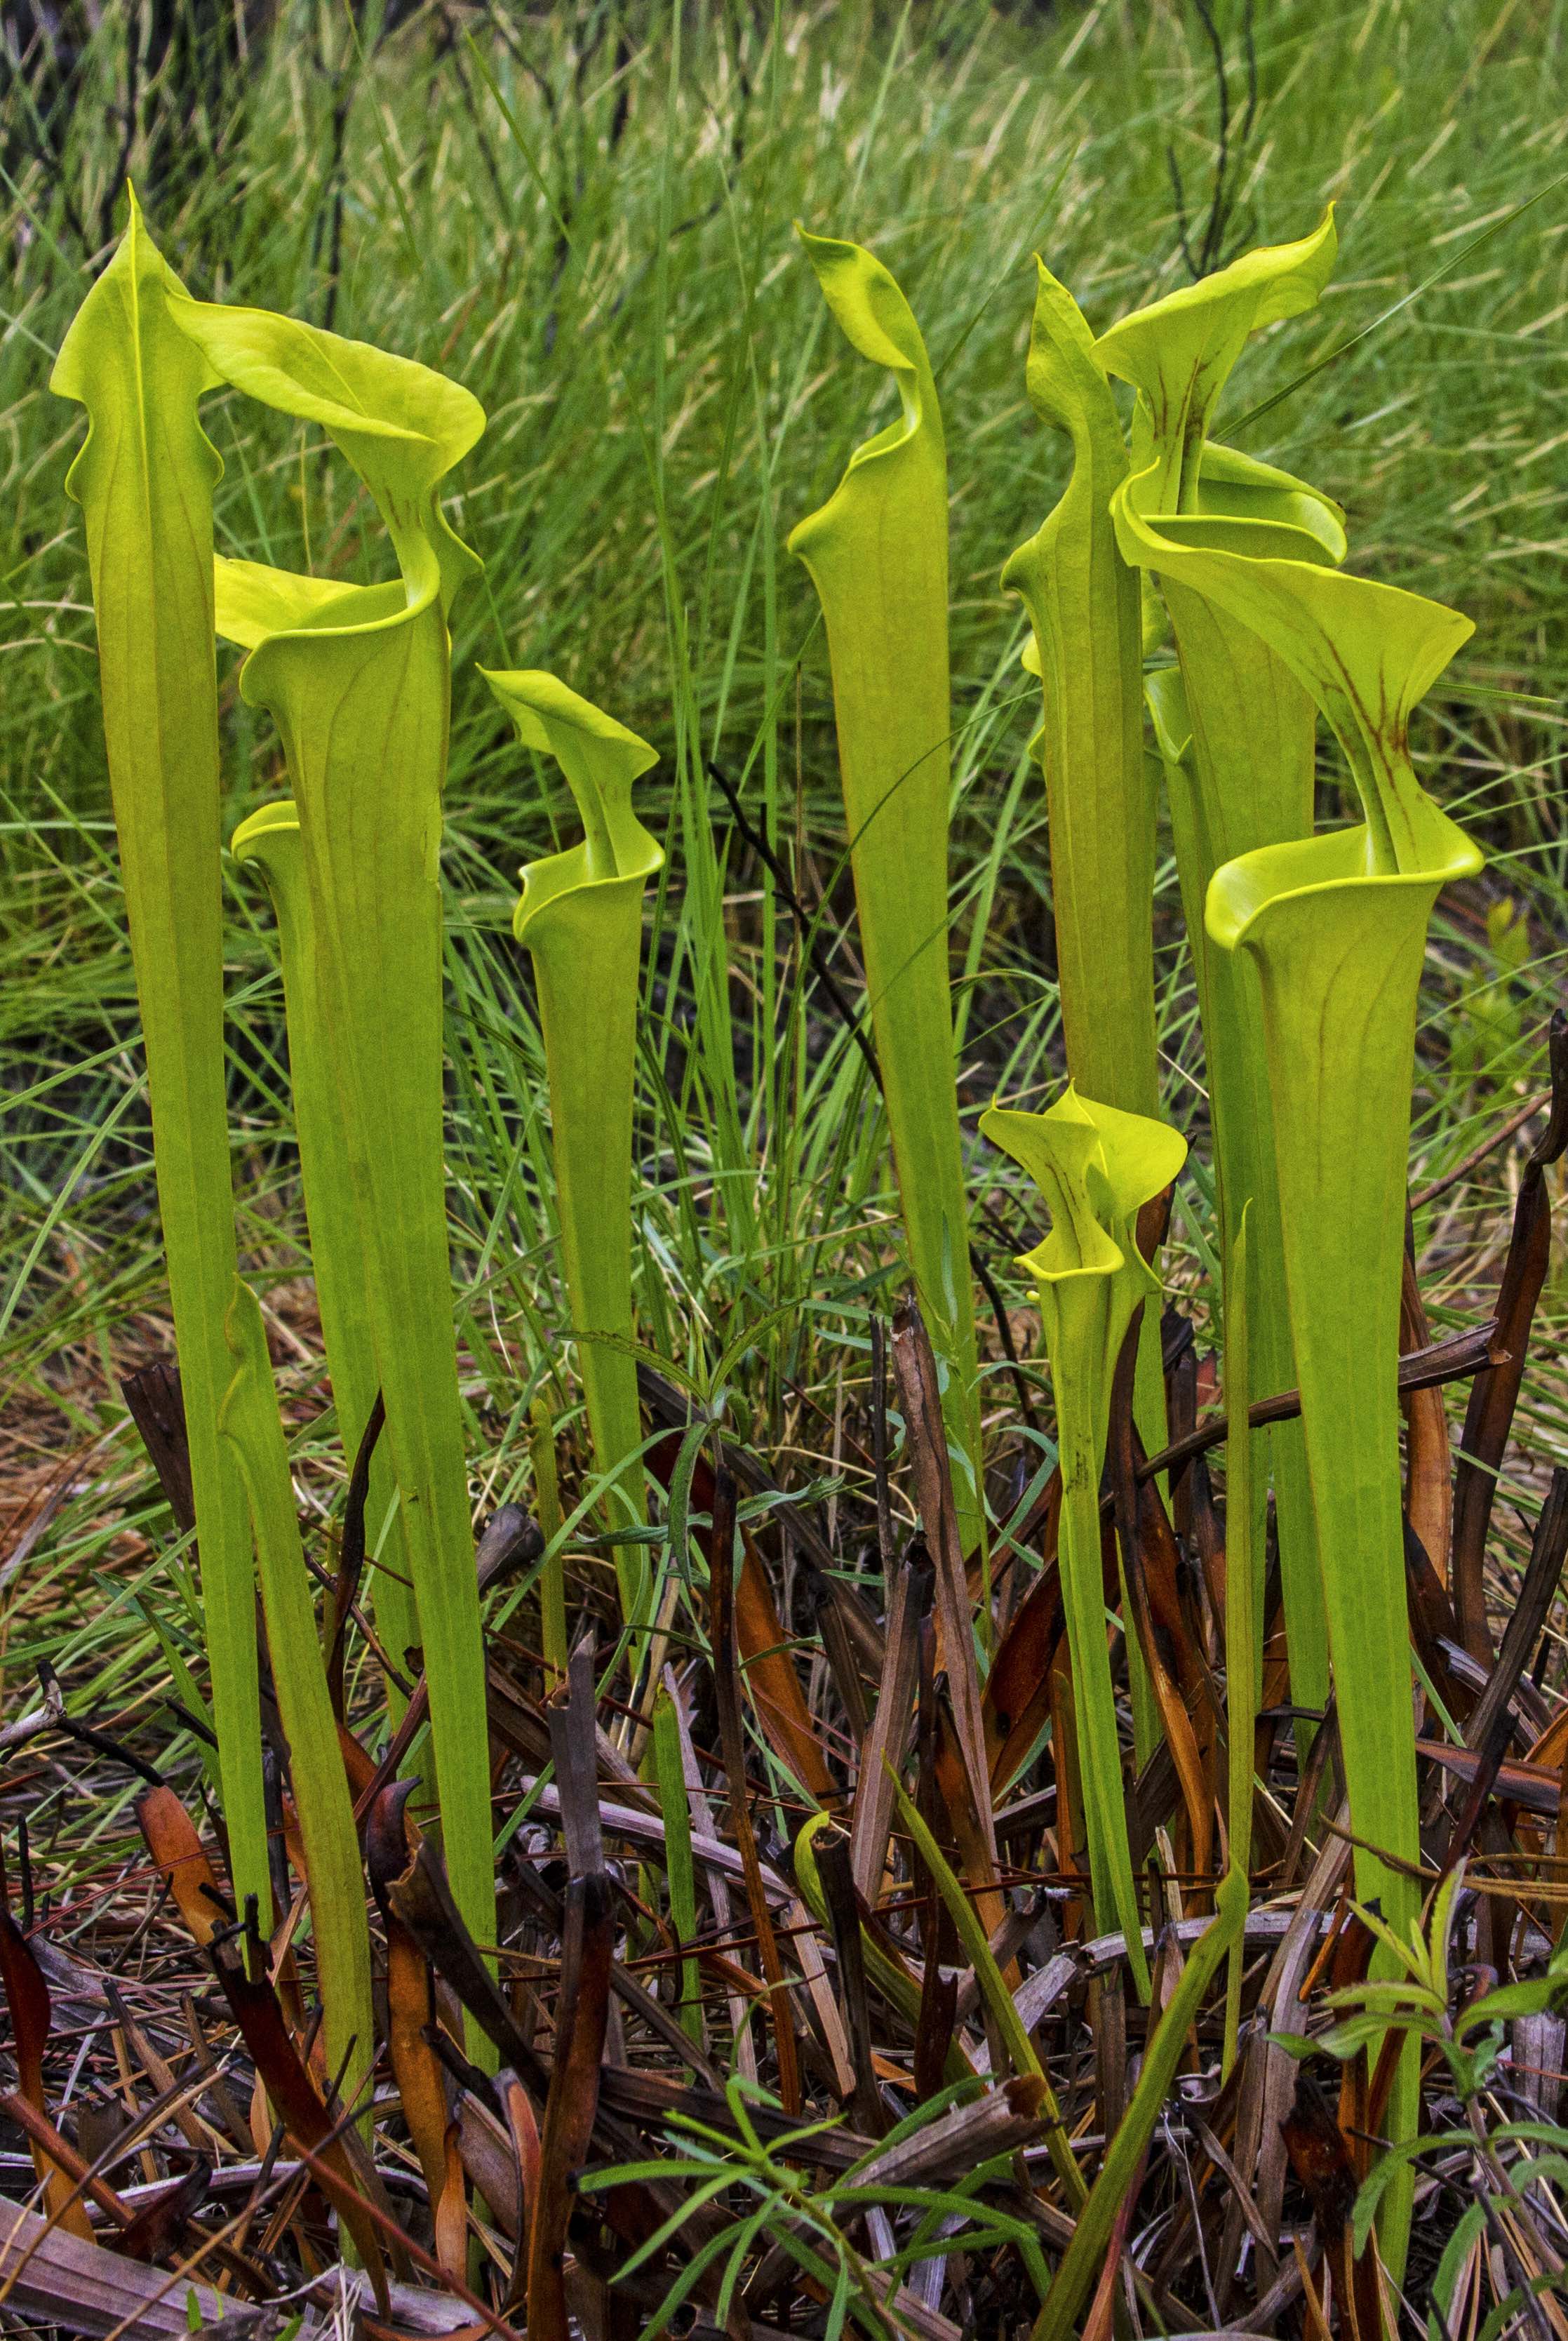 The Scientific Name is Sarracenia flava. You will likely hear them called Yellow Pitcherplant. This picture shows the  of Sarracenia flava